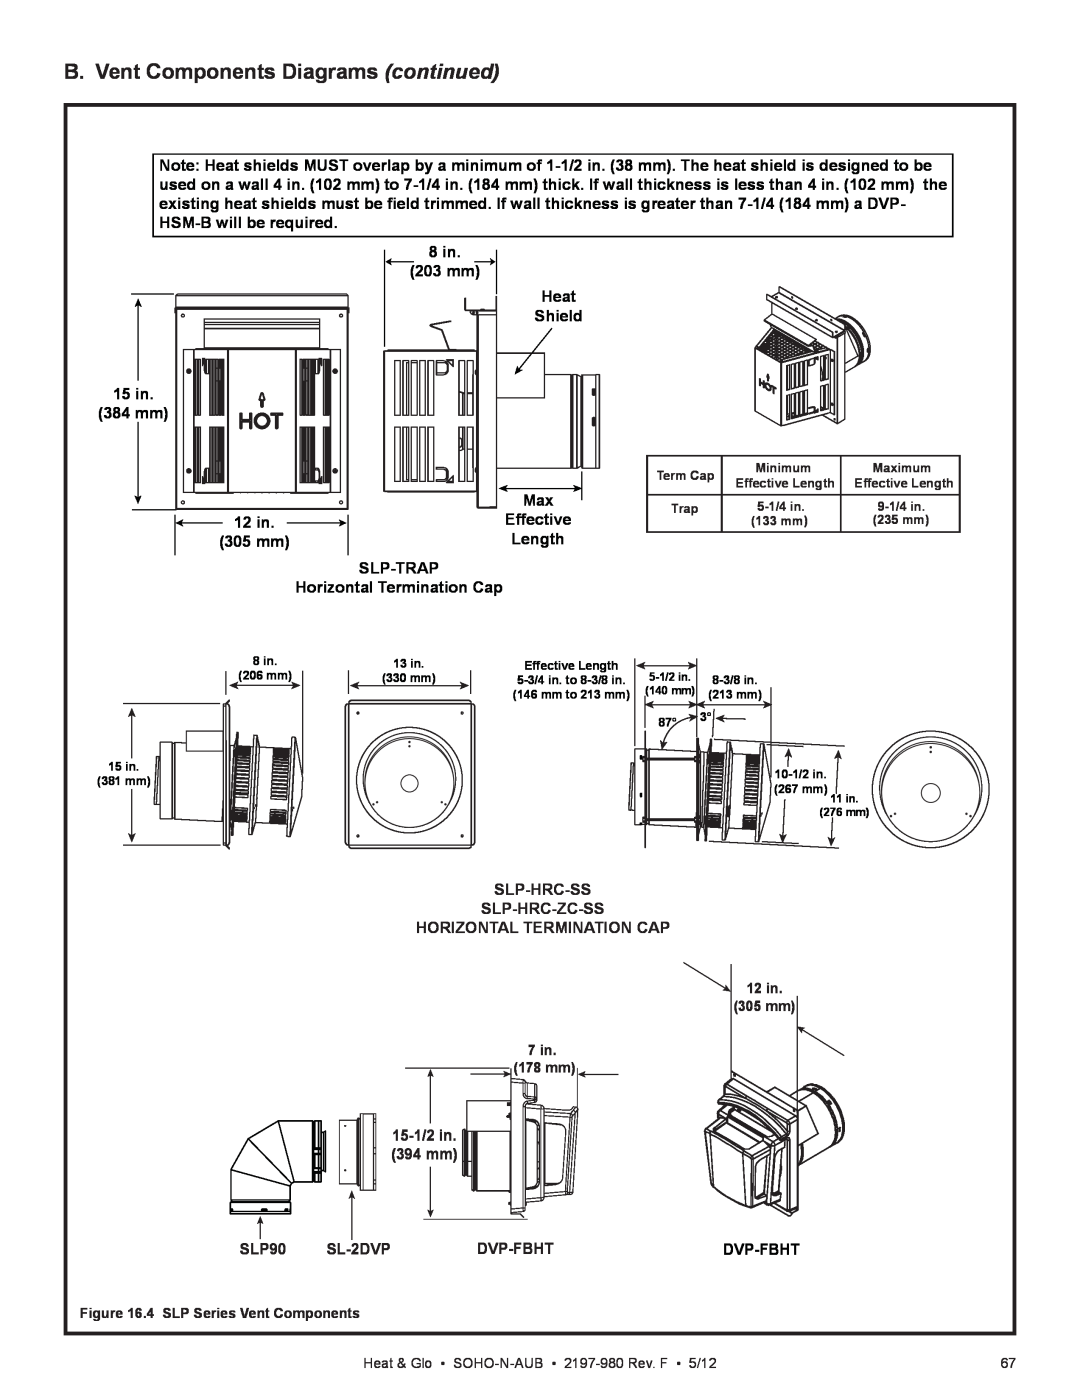 Heat & Glo LifeStyle 2197-980 B. Vent Components Diagrams continued, 8 in 203 mm Heat Shield 15 in 384 mm, 12 in, Length 